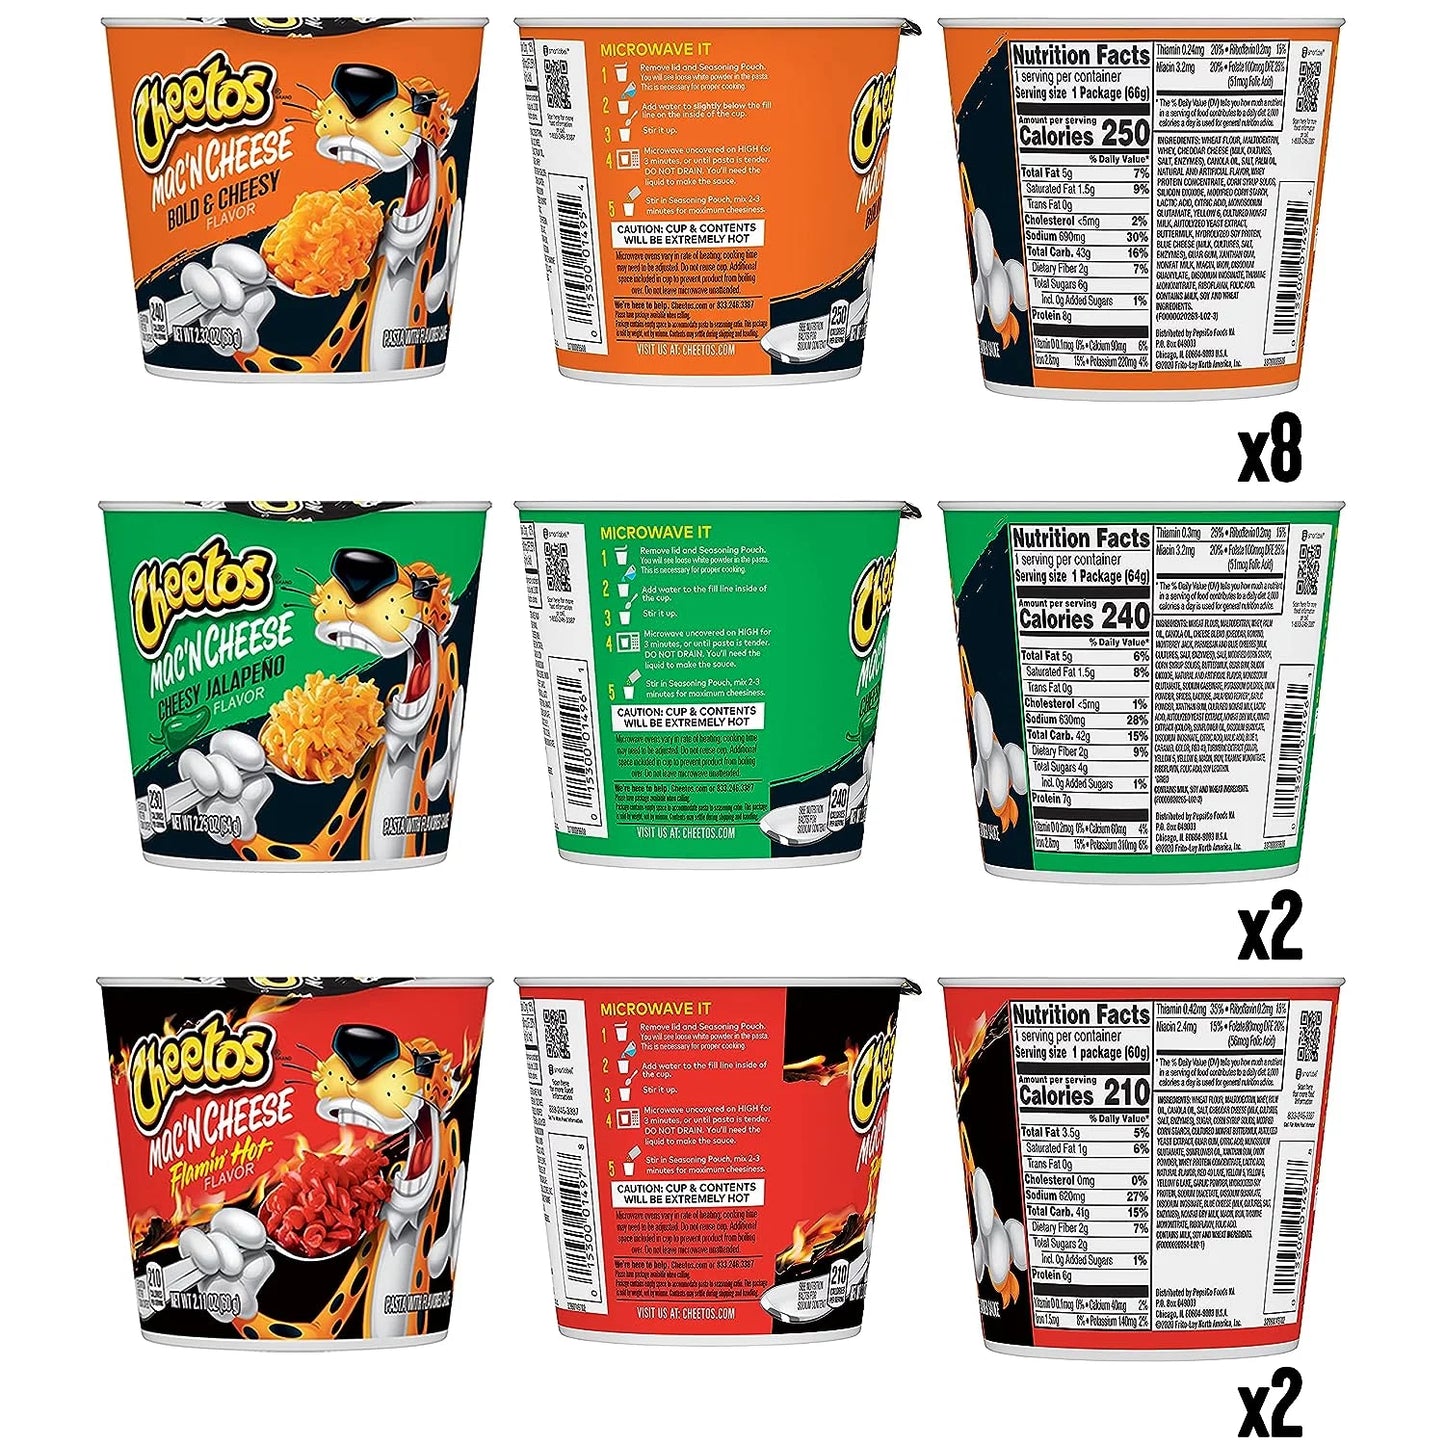 , 3 Flavor Variety Pack, Mac and Cheese, Macaroni & Cheese, 2 Oz Cups, 12 Count